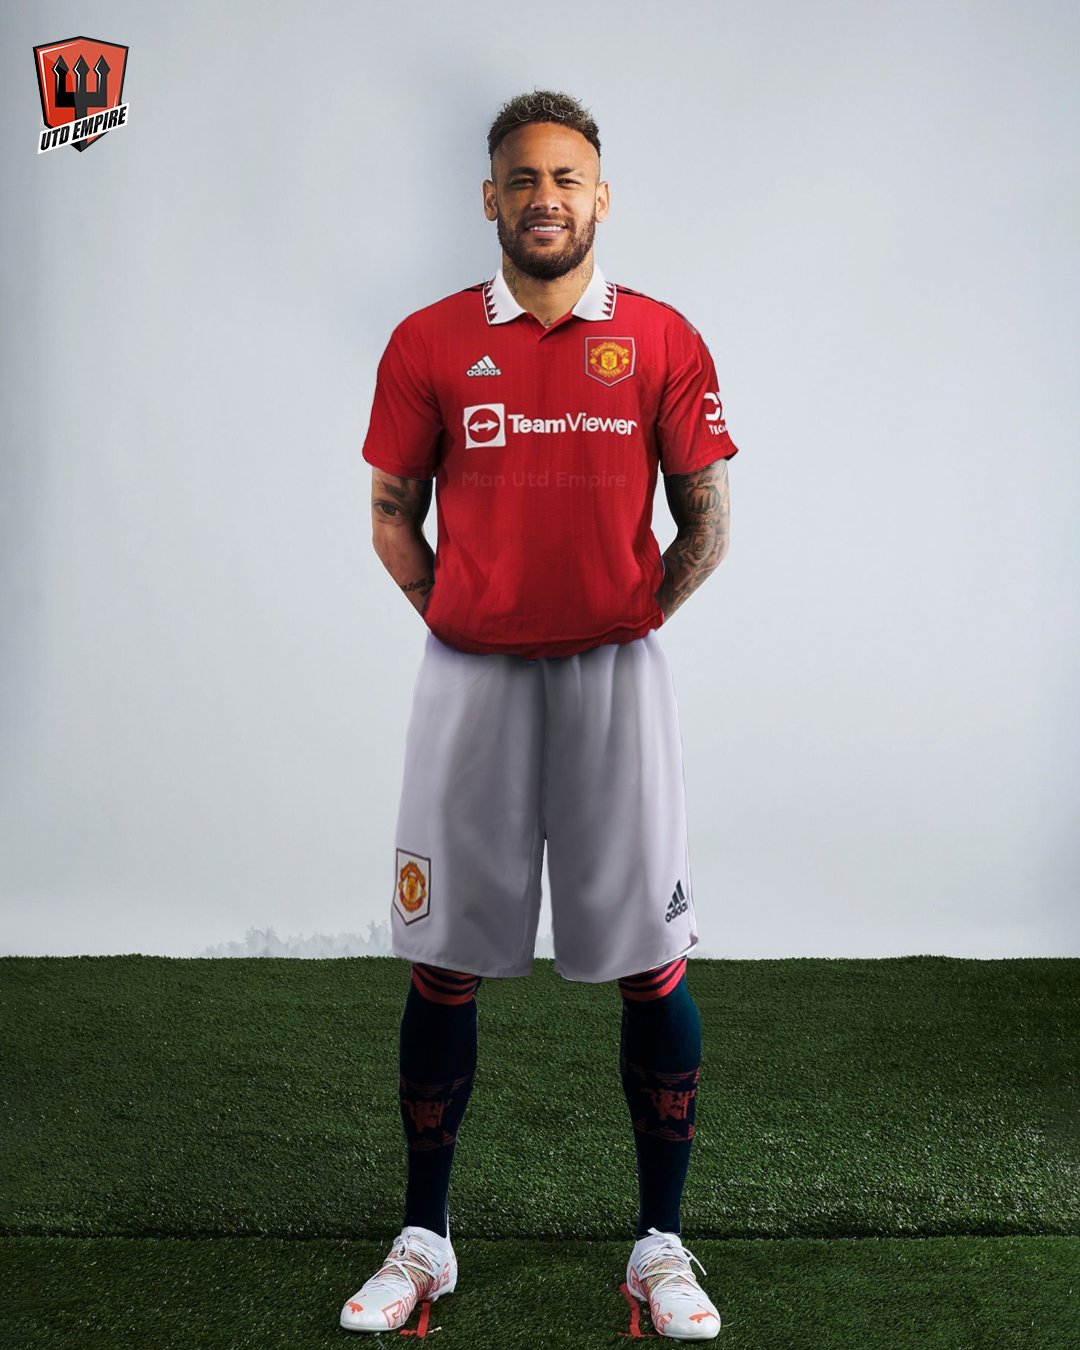 Manchester United kits from the past 25 years